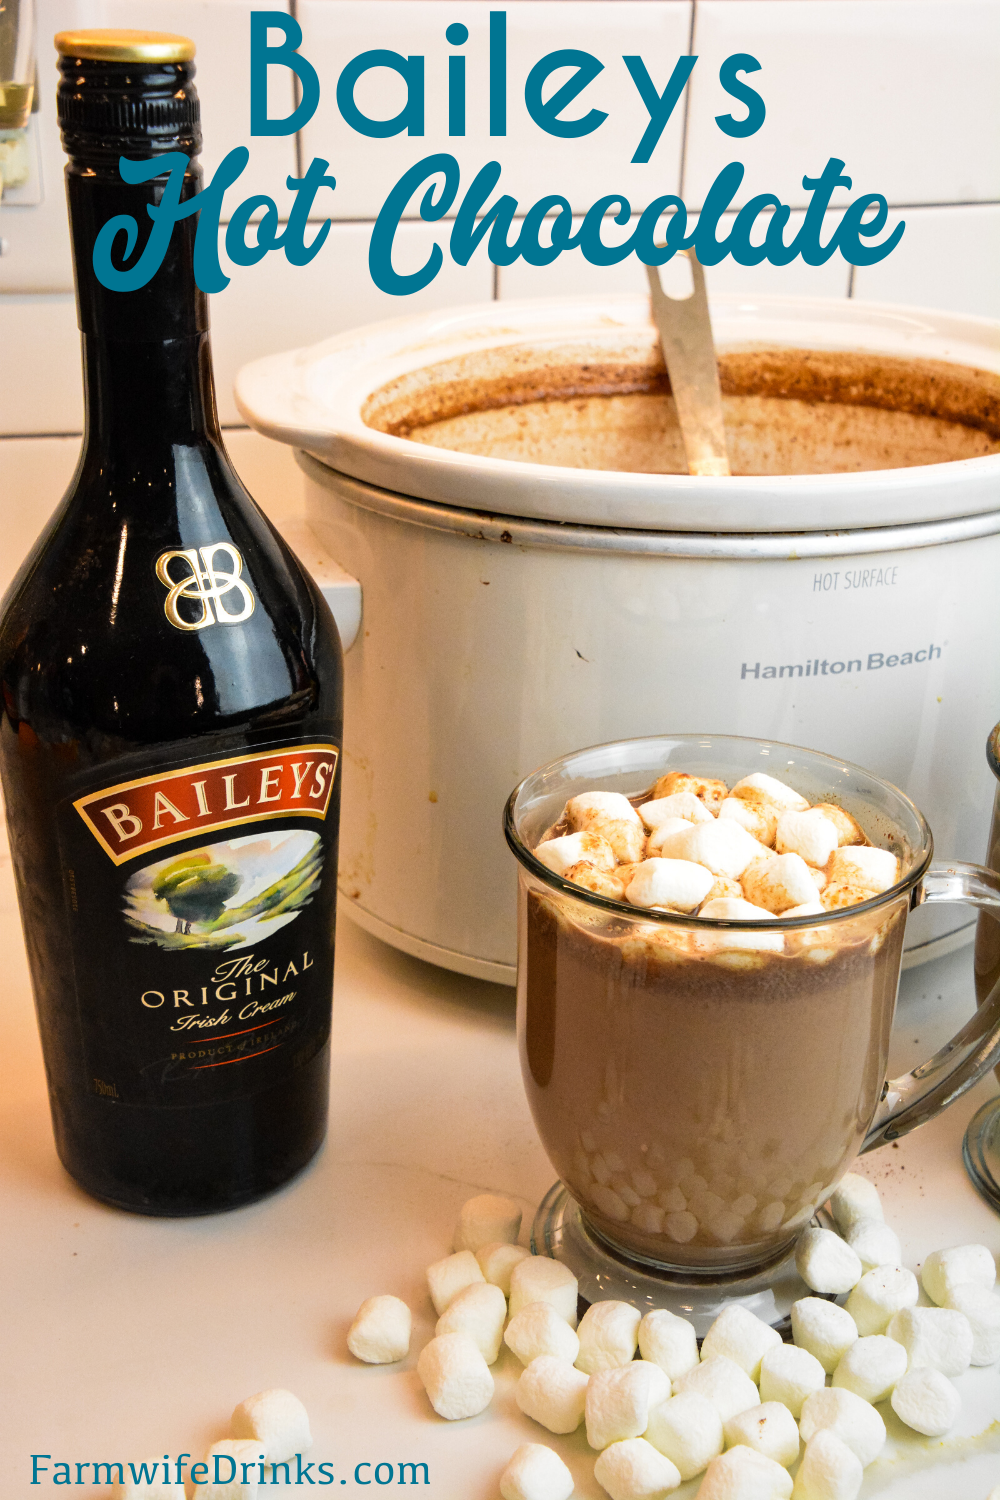 Crock Pot Hot Chocolate is a rich hot chocolate that melts chocolate chips, sweetened condensed milk, heavy cream, and whole milk beautifully together for the most insanely good hot chocolate.